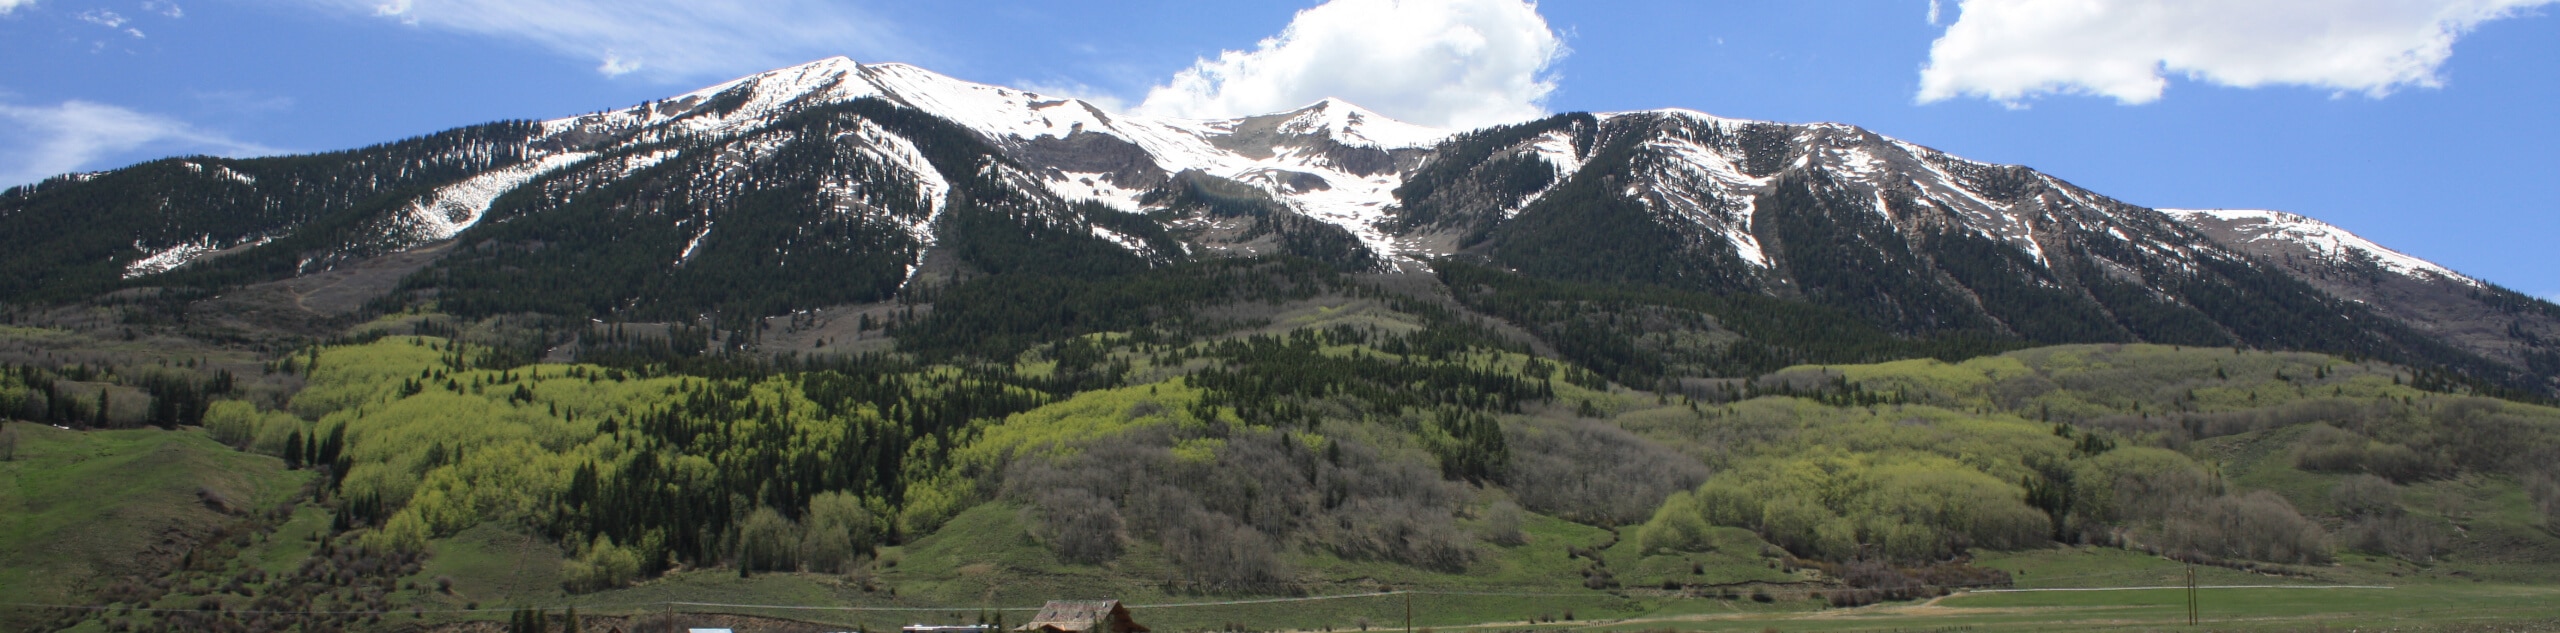 Crested Butte to Aspen via West Maroon Pass Hike